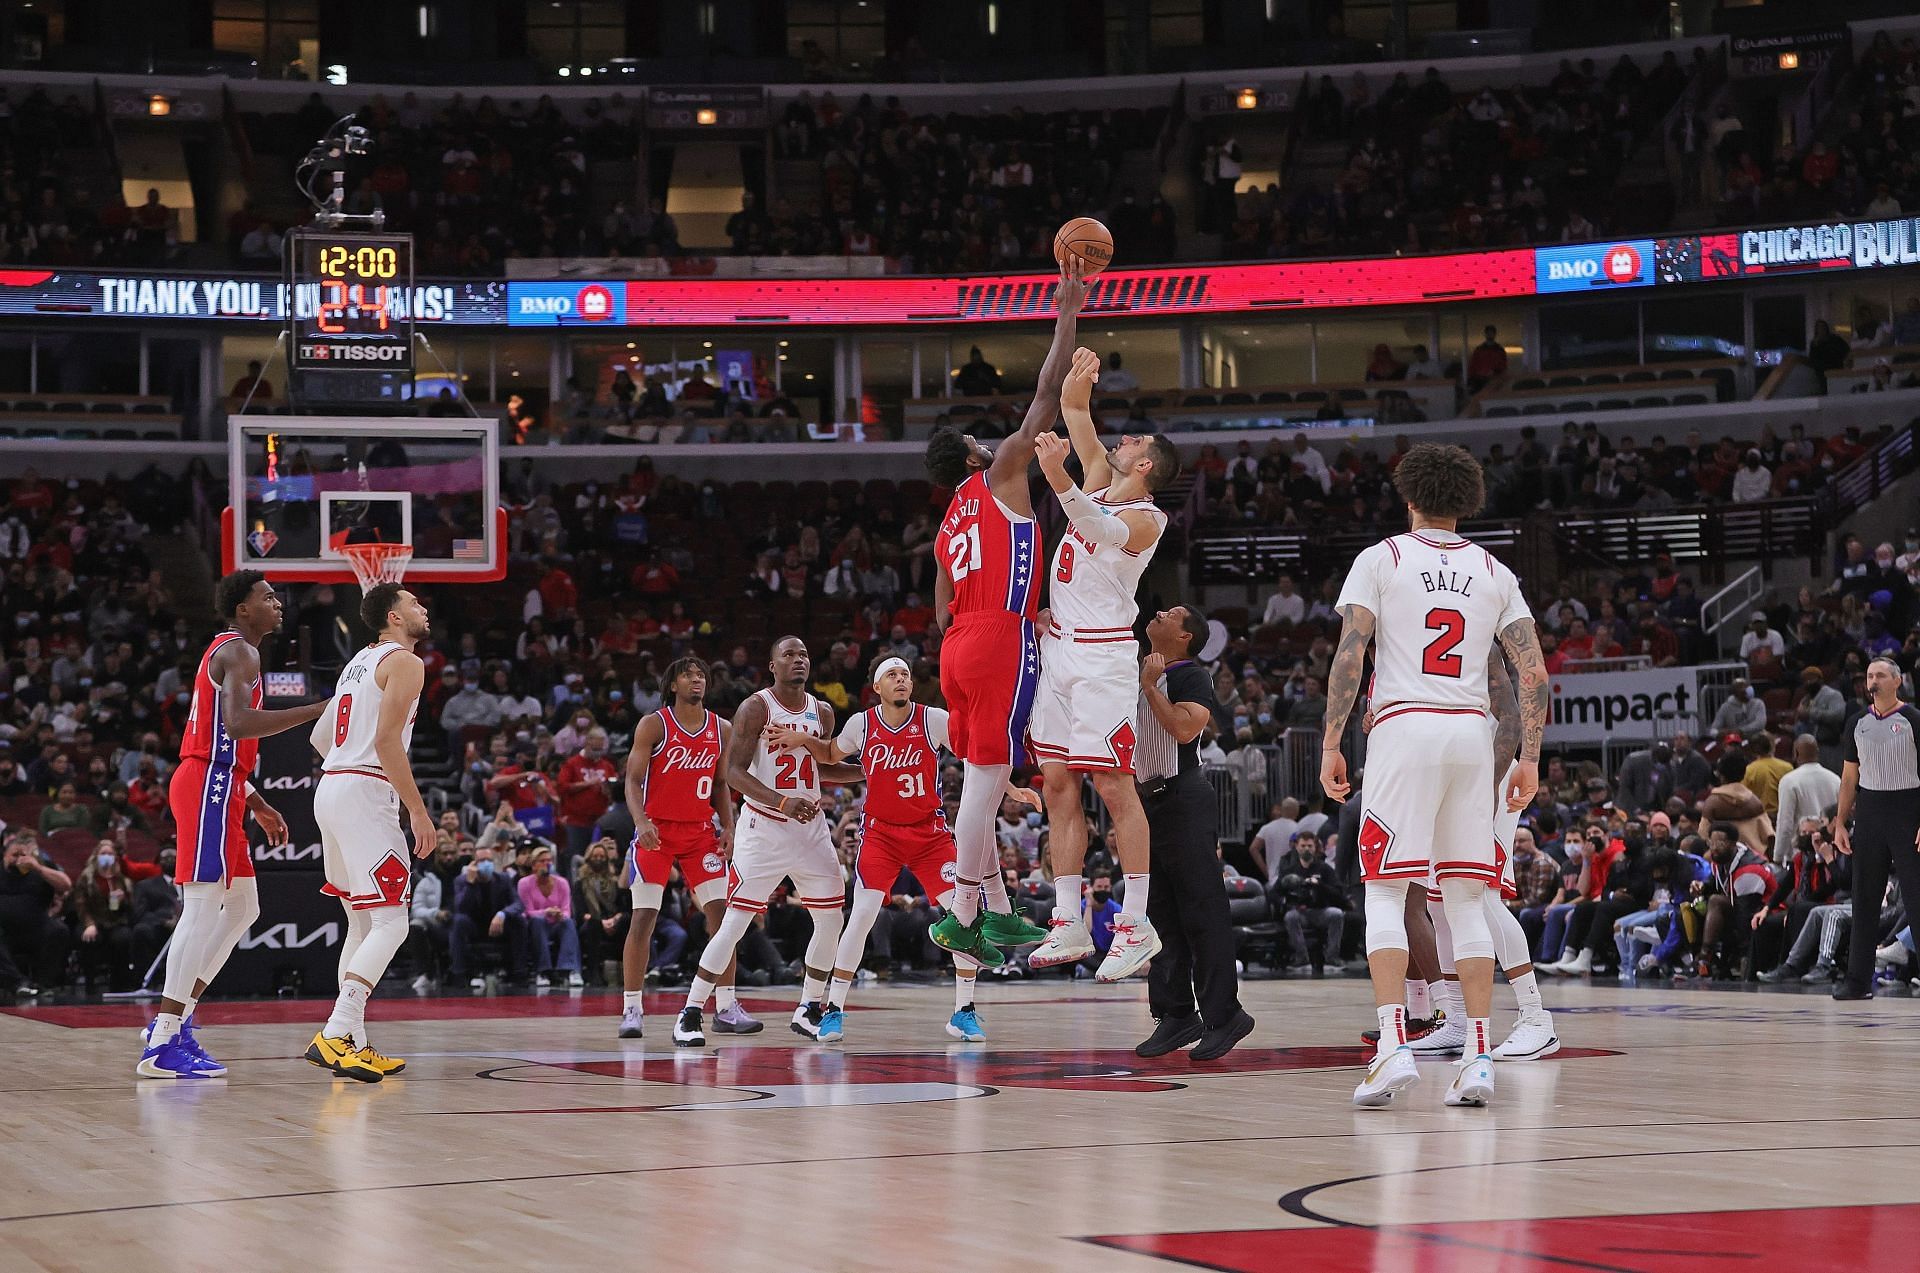 The Philadelphia 76ers will host the Chicago Bulls on March 7.